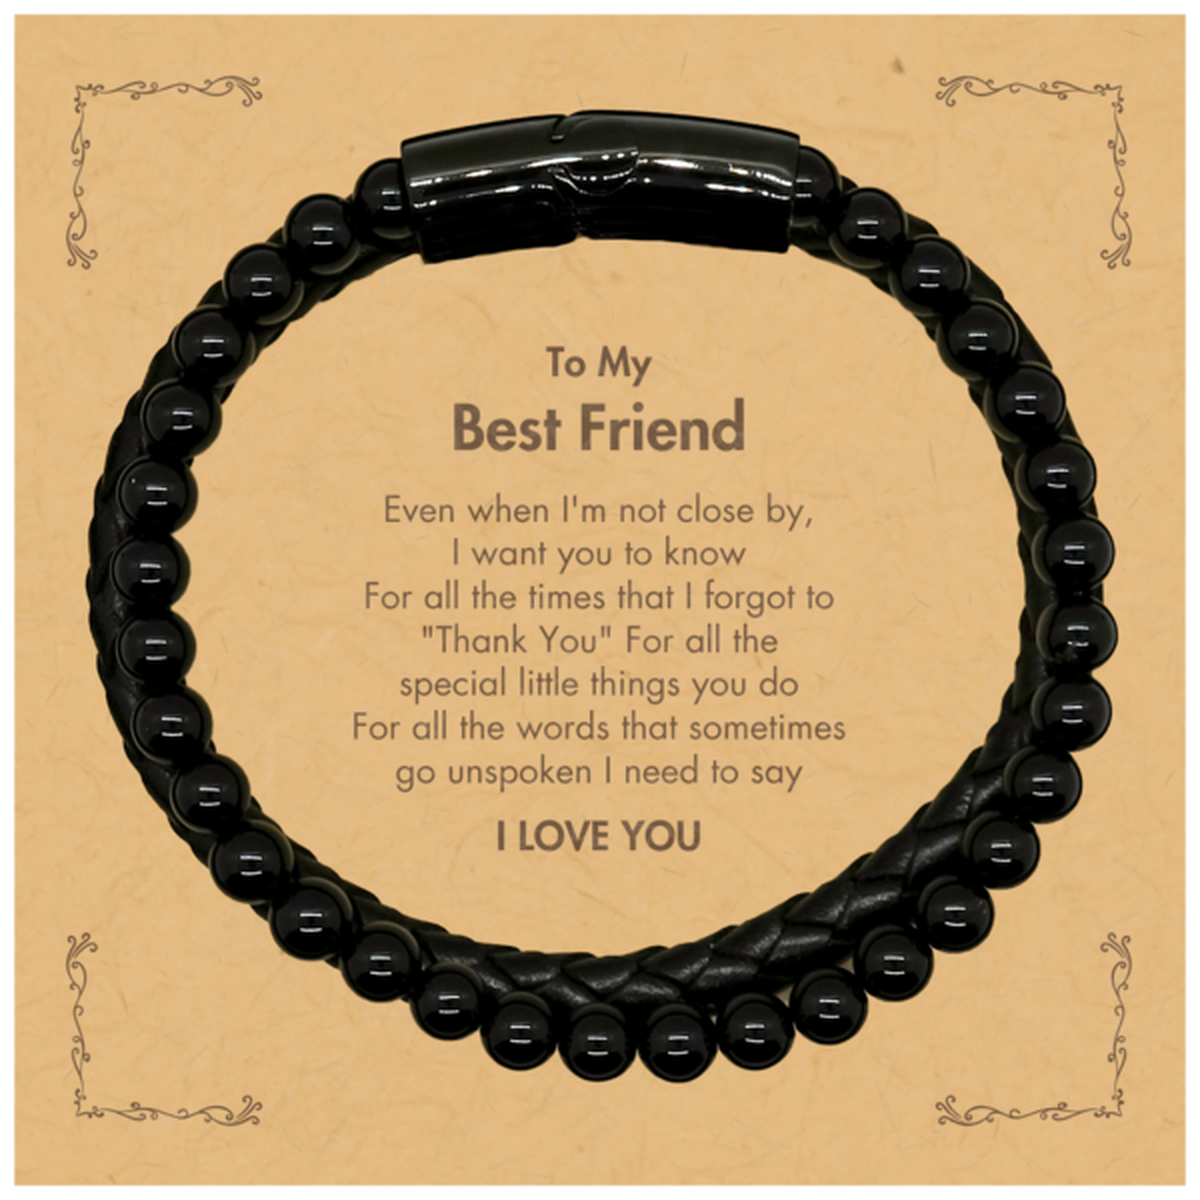 Thank You Gifts for Best Friend, Keepsake Stone Leather Bracelets Gifts for Best Friend Birthday Mother's day Father's Day Best Friend For all the words That sometimes go unspoken I need to say I LOVE YOU